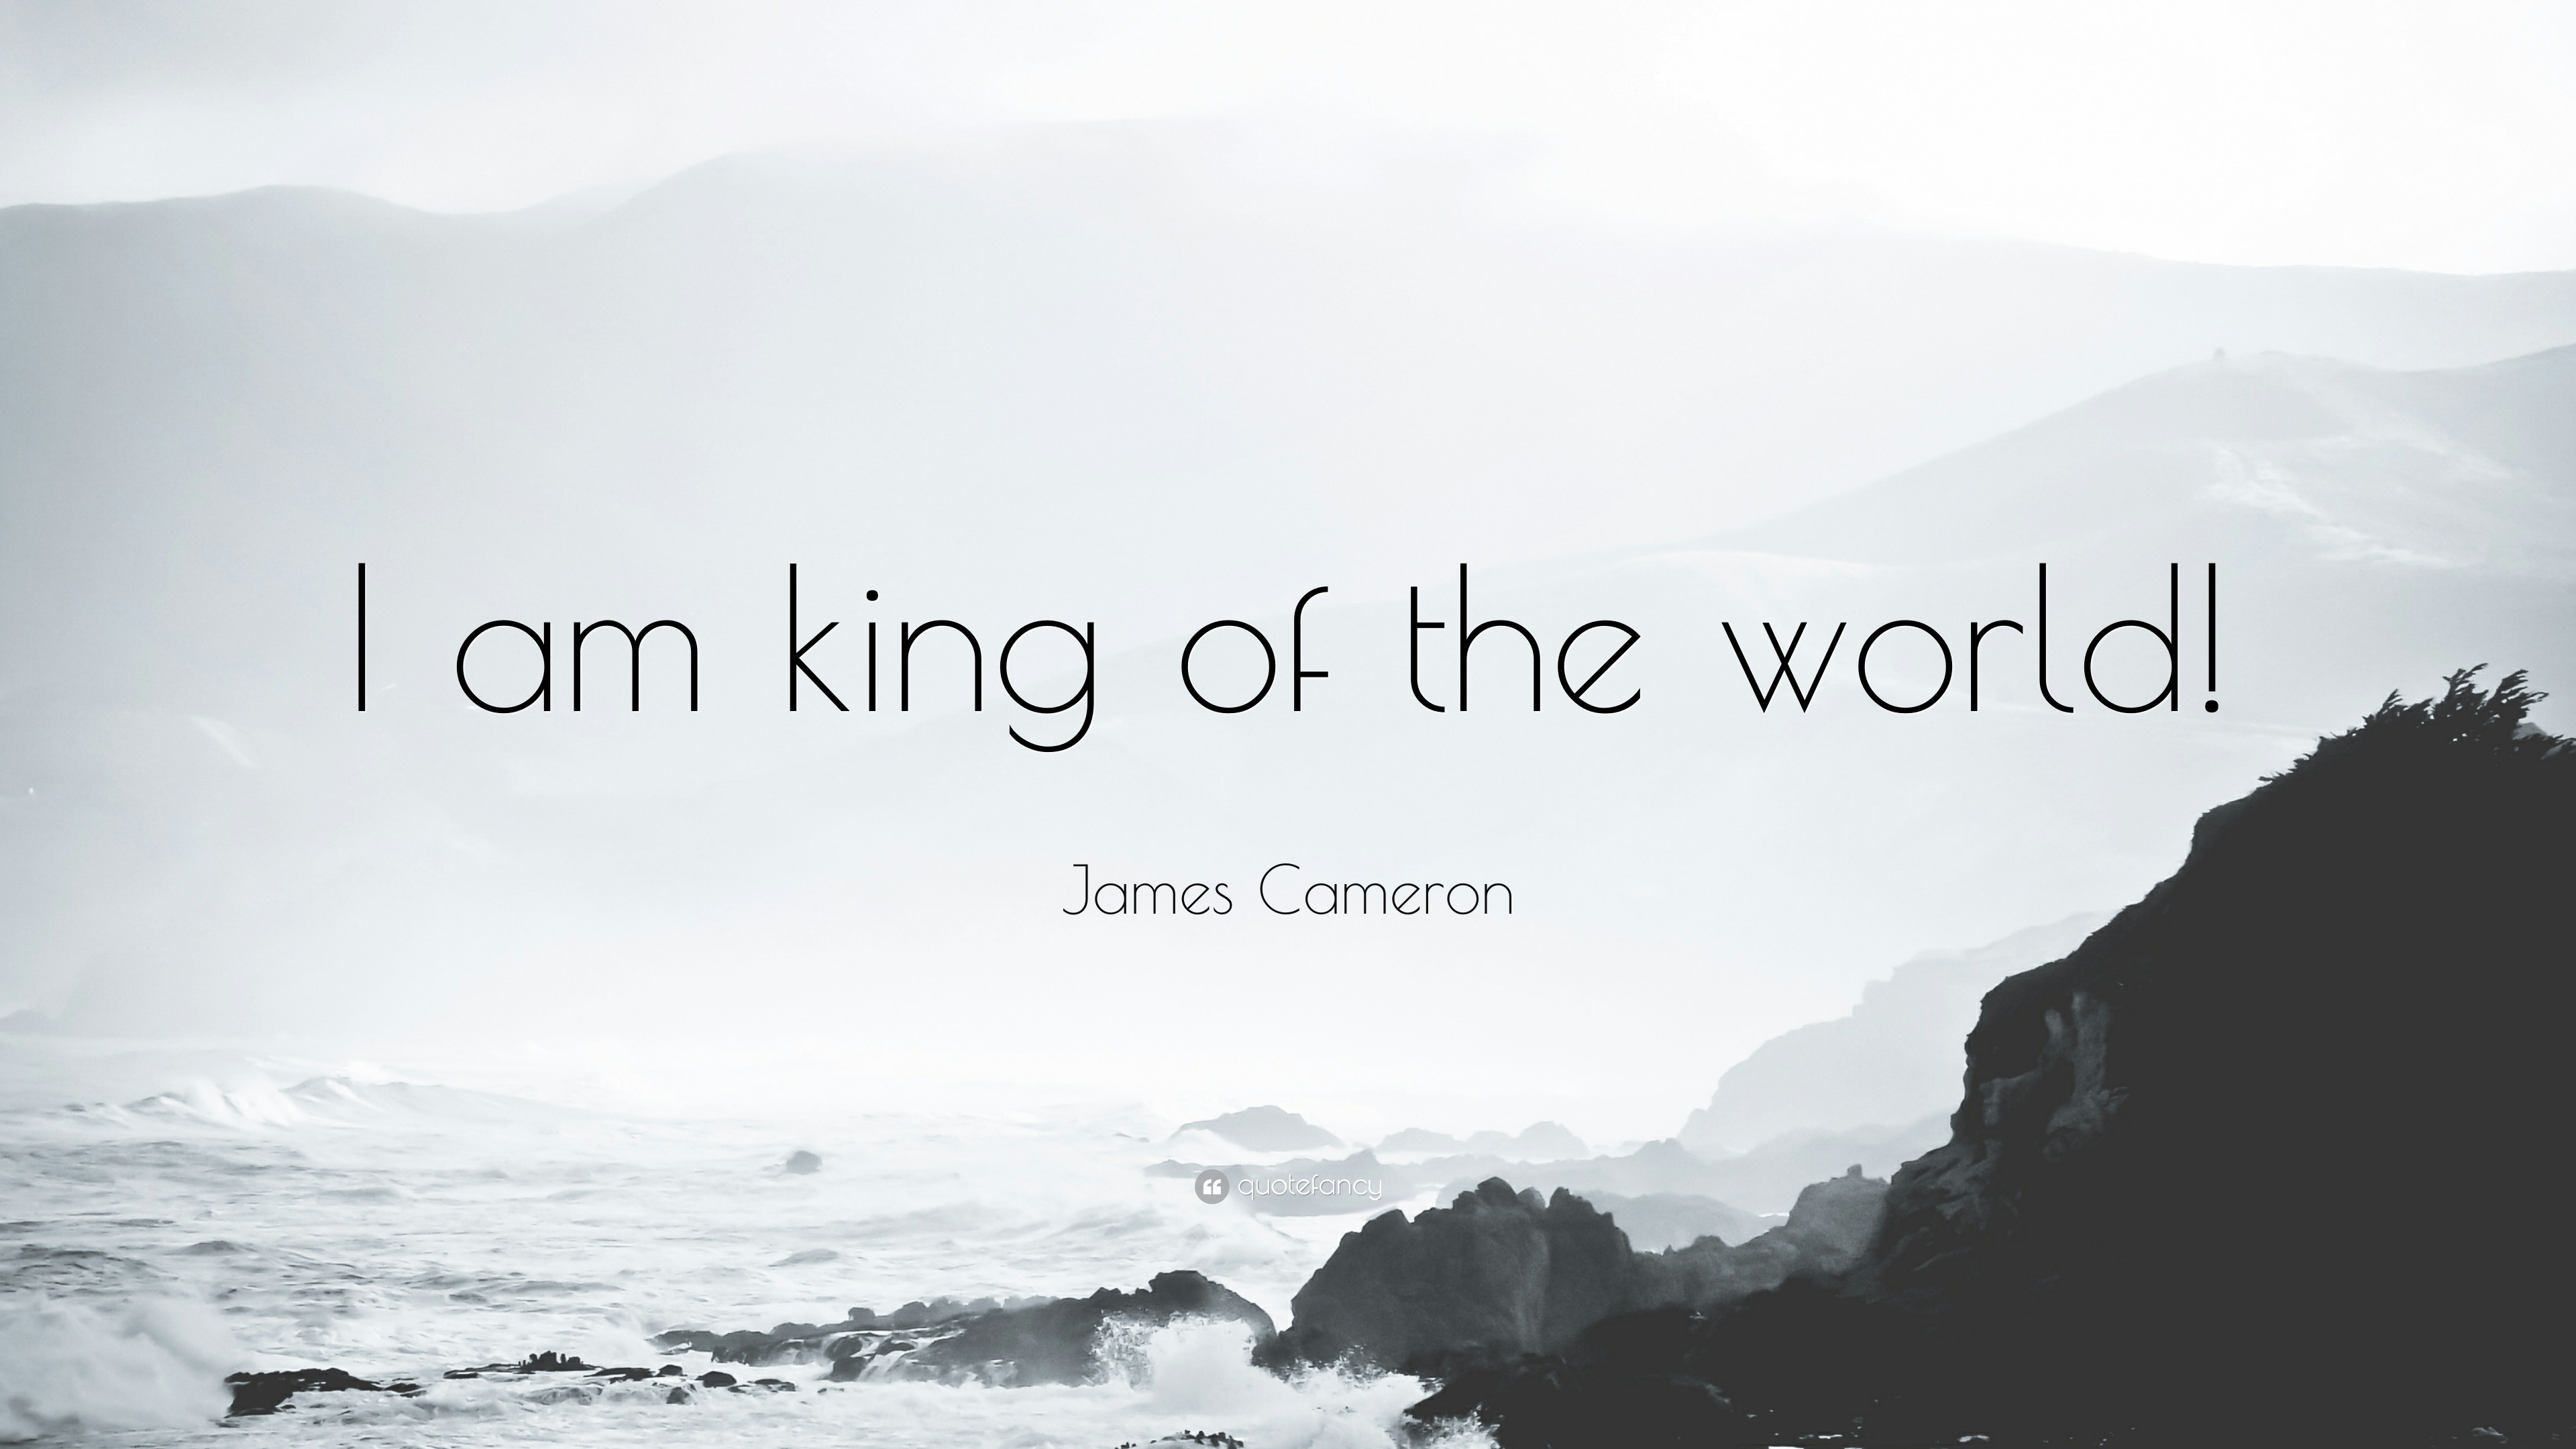 I am the greatest. I'm the king of the world!